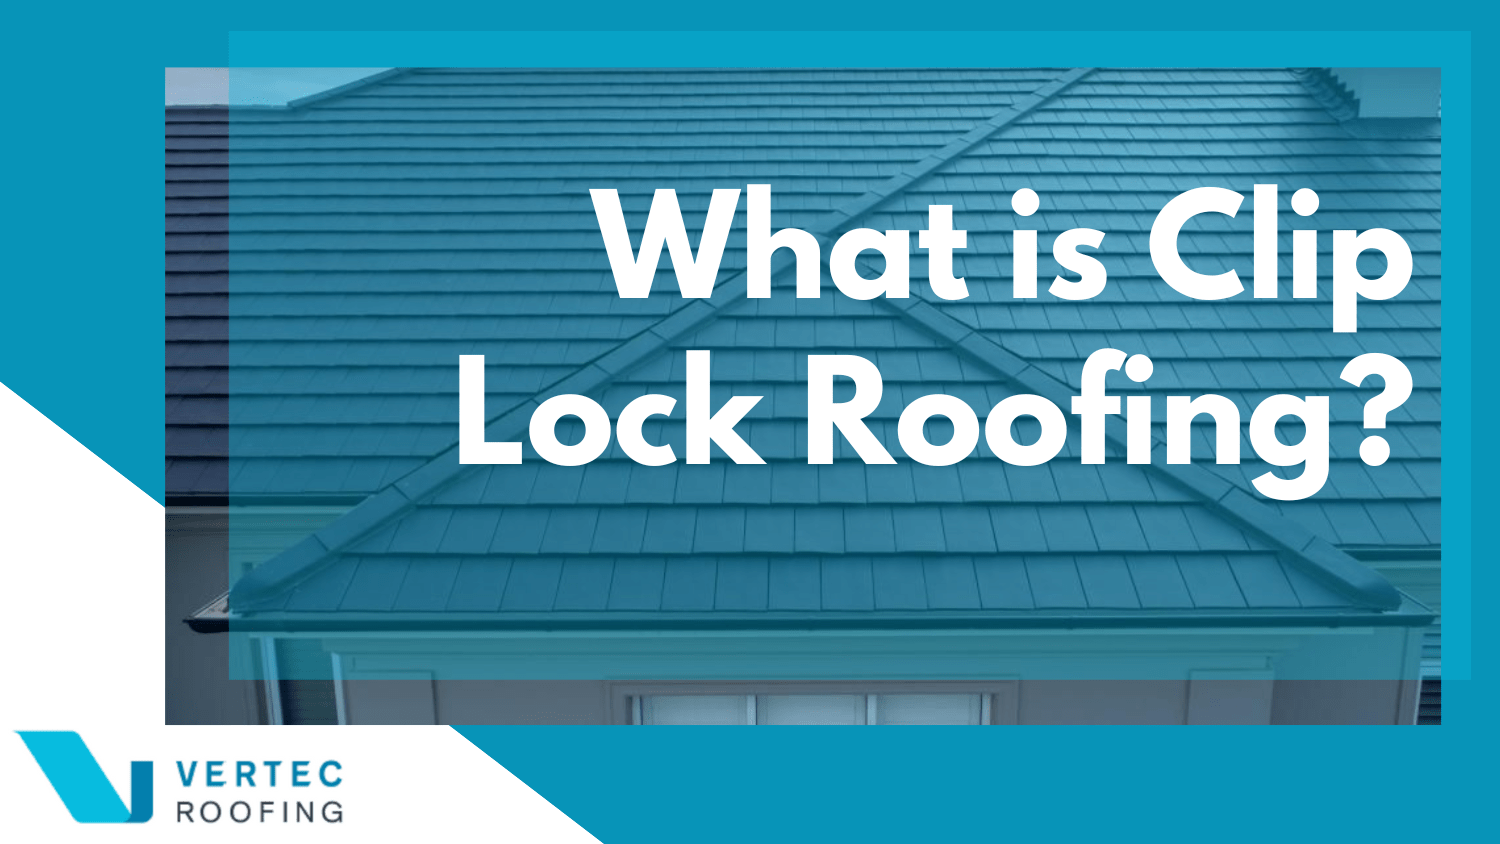 What is clip lock roofing?